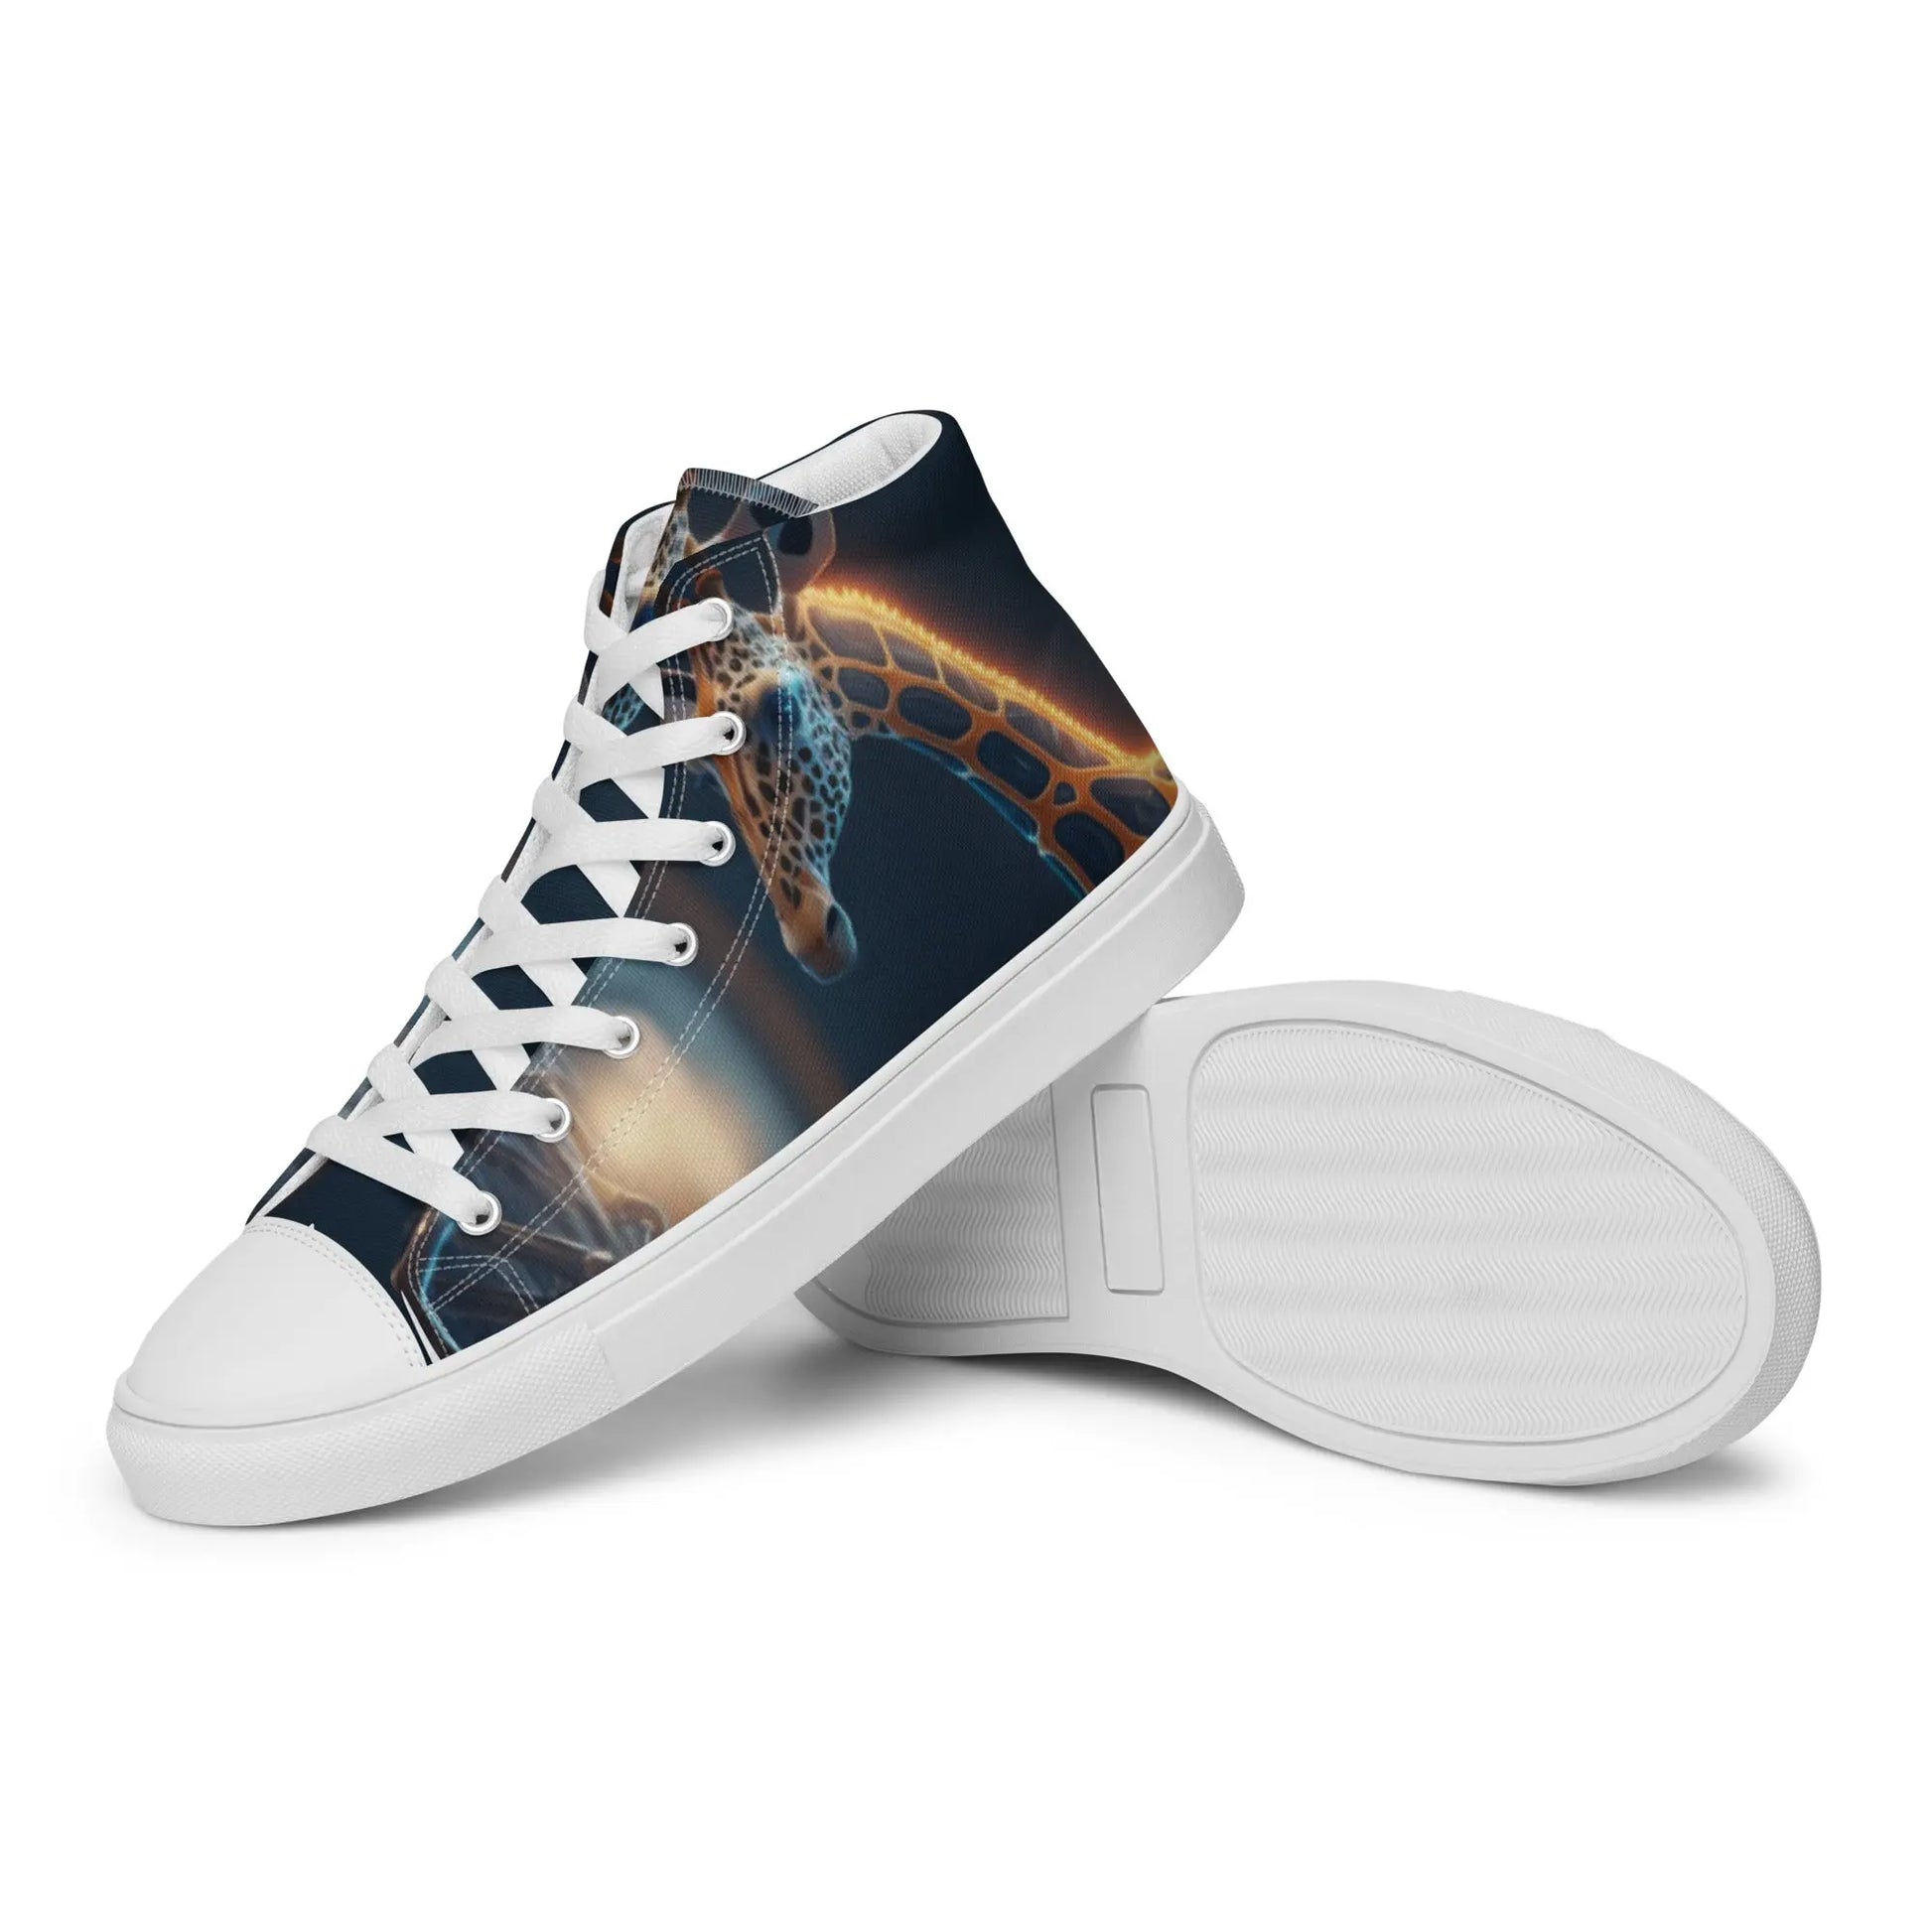 Futuristic Giraffe High Top Canvas Sneakers: AI-Engineered, Unisex, Canvas Animal Collection, Durable, Comfortable, Animal Print Design Kinetic Footwear